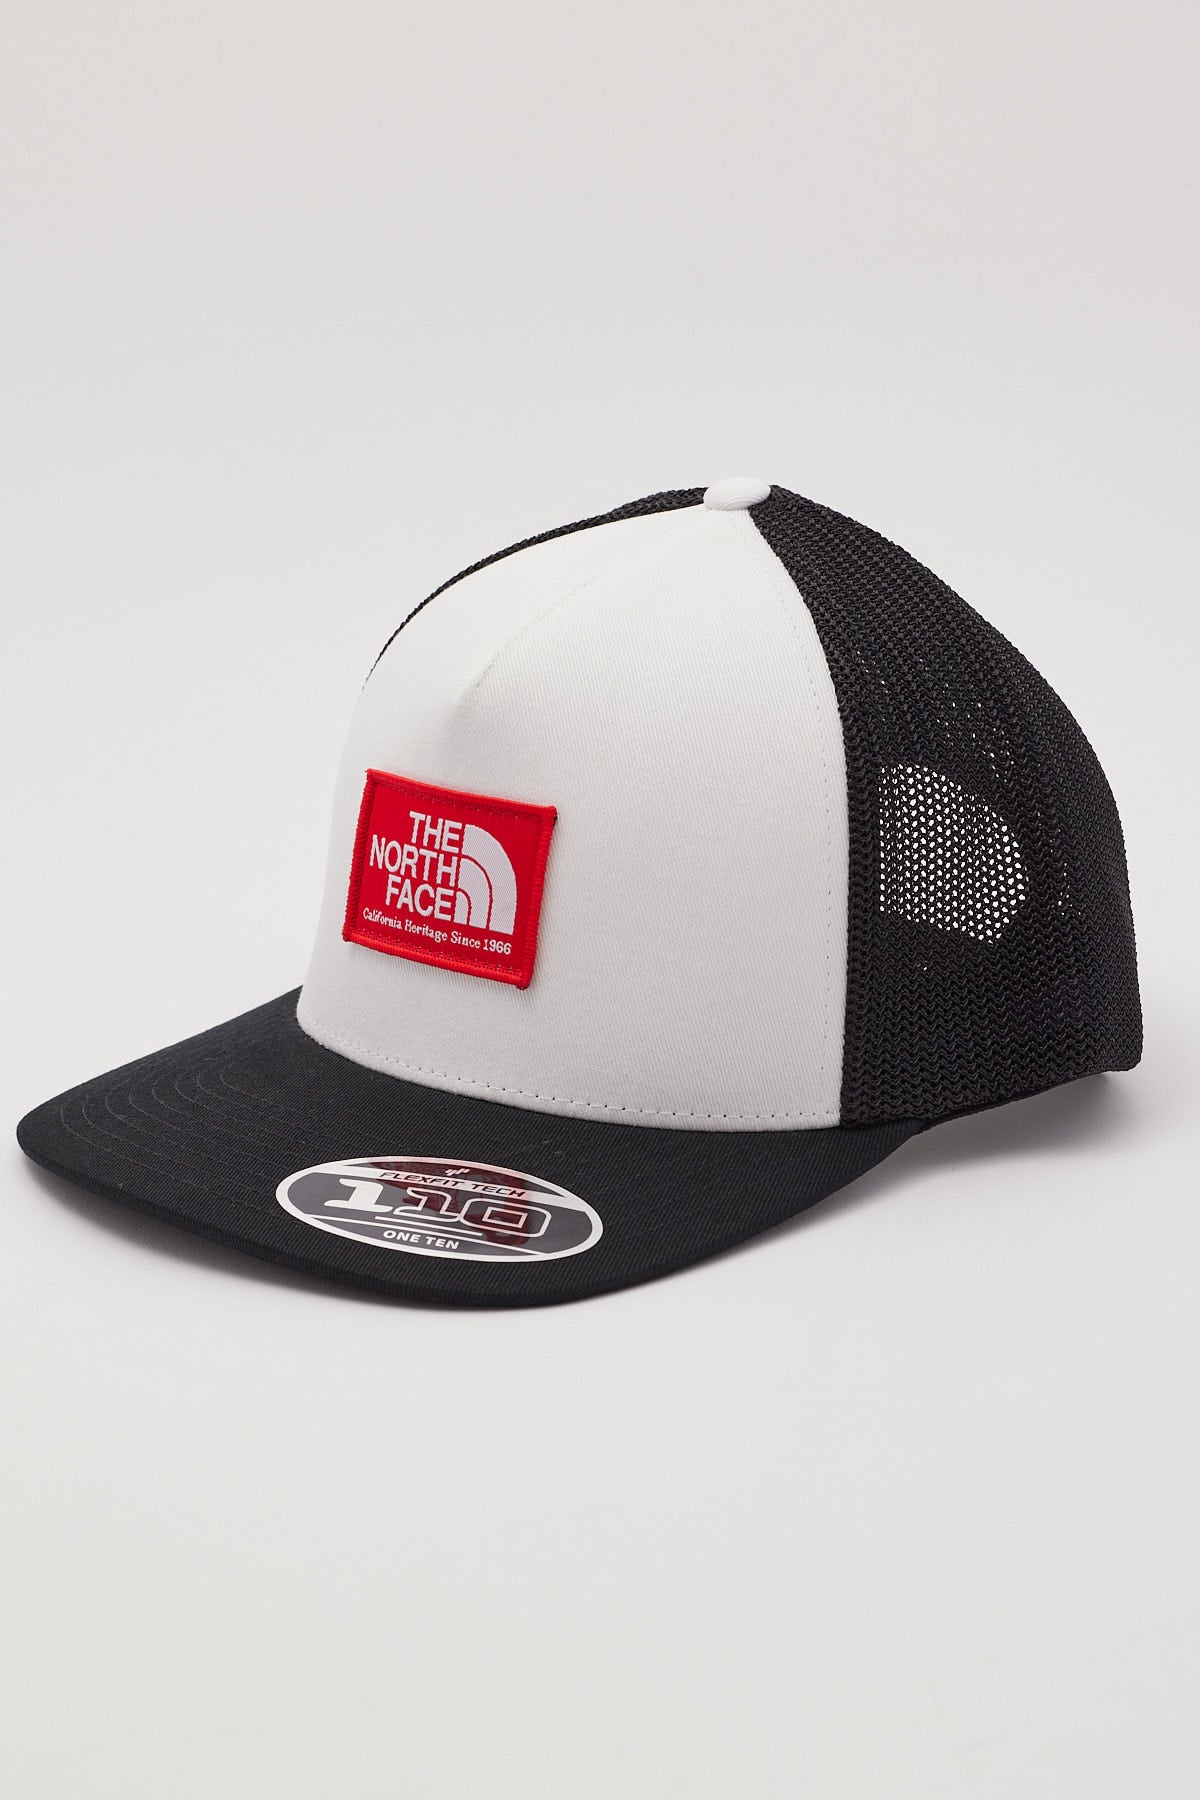 The North Face Keep It Patched Structured Trucker Black/White/Red